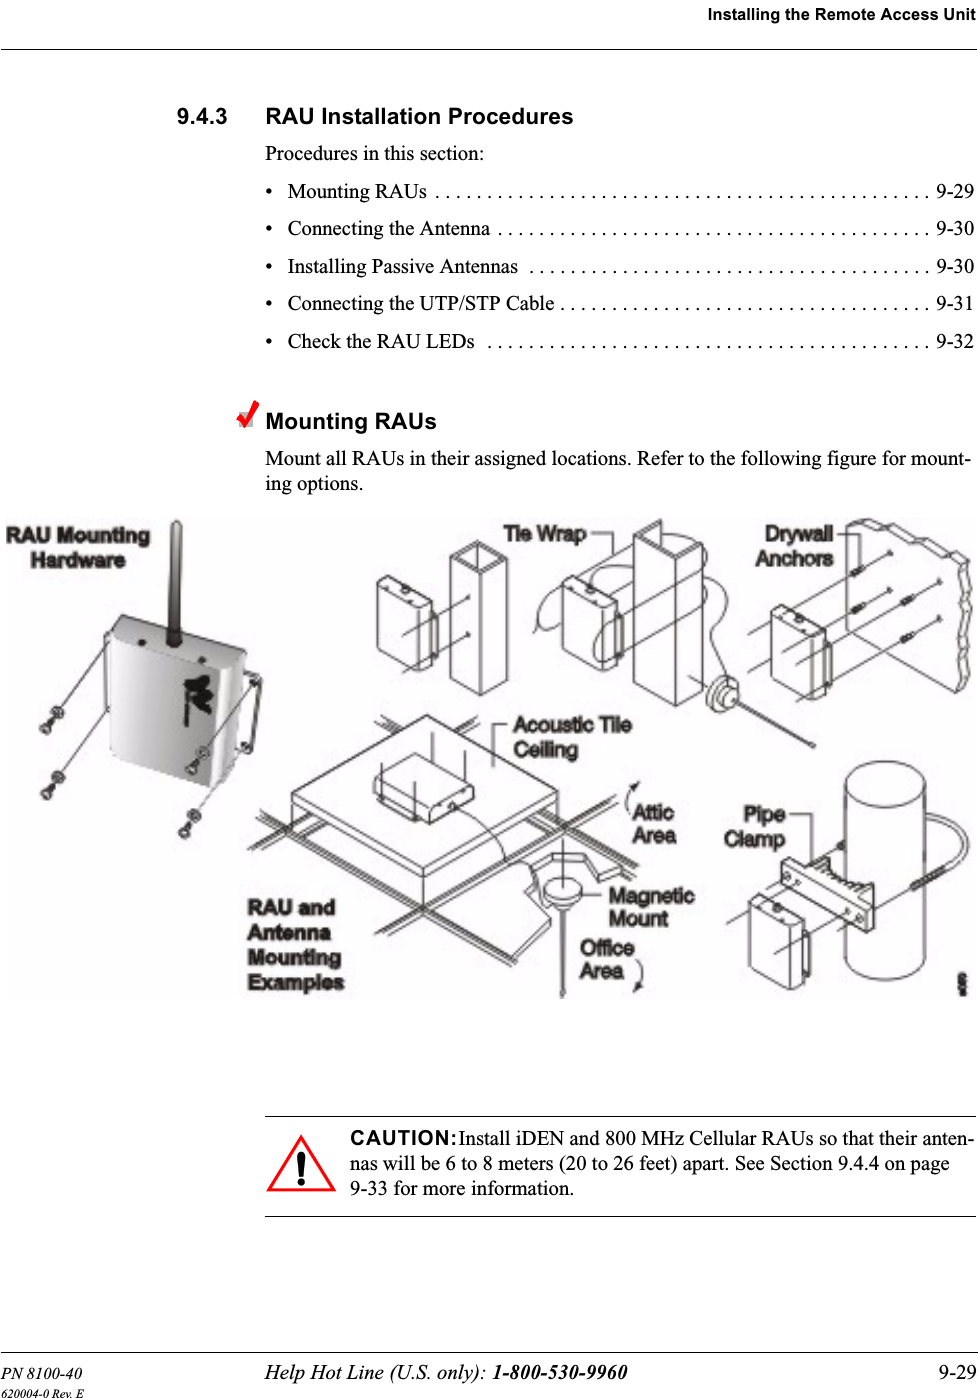 PN 8100-40 Help Hot Line (U.S. only): 1-800-530-9960 9-29620004-0 Rev. EInstalling the Remote Access Unit9.4.3 RAU Installation ProceduresProcedures in this section:• Mounting RAUs . . . . . . . . . . . . . . . . . . . . . . . . . . . . . . . . . . . . . . . . . . . . . . . . 9-29• Connecting the Antenna . . . . . . . . . . . . . . . . . . . . . . . . . . . . . . . . . . . . . . . . . . 9-30• Installing Passive Antennas  . . . . . . . . . . . . . . . . . . . . . . . . . . . . . . . . . . . . . . . 9-30• Connecting the UTP/STP Cable . . . . . . . . . . . . . . . . . . . . . . . . . . . . . . . . . . . . 9-31• Check the RAU LEDs  . . . . . . . . . . . . . . . . . . . . . . . . . . . . . . . . . . . . . . . . . . . 9-32Mounting RAUsMount all RAUs in their assigned locations. Refer to the following figure for mount-ing options.CAUTION:Install iDEN and 800 MHz Cellular RAUs so that their anten-nas will be 6 to 8 meters (20 to 26 feet) apart. See Section 9.4.4 on page 9-33 for more information.